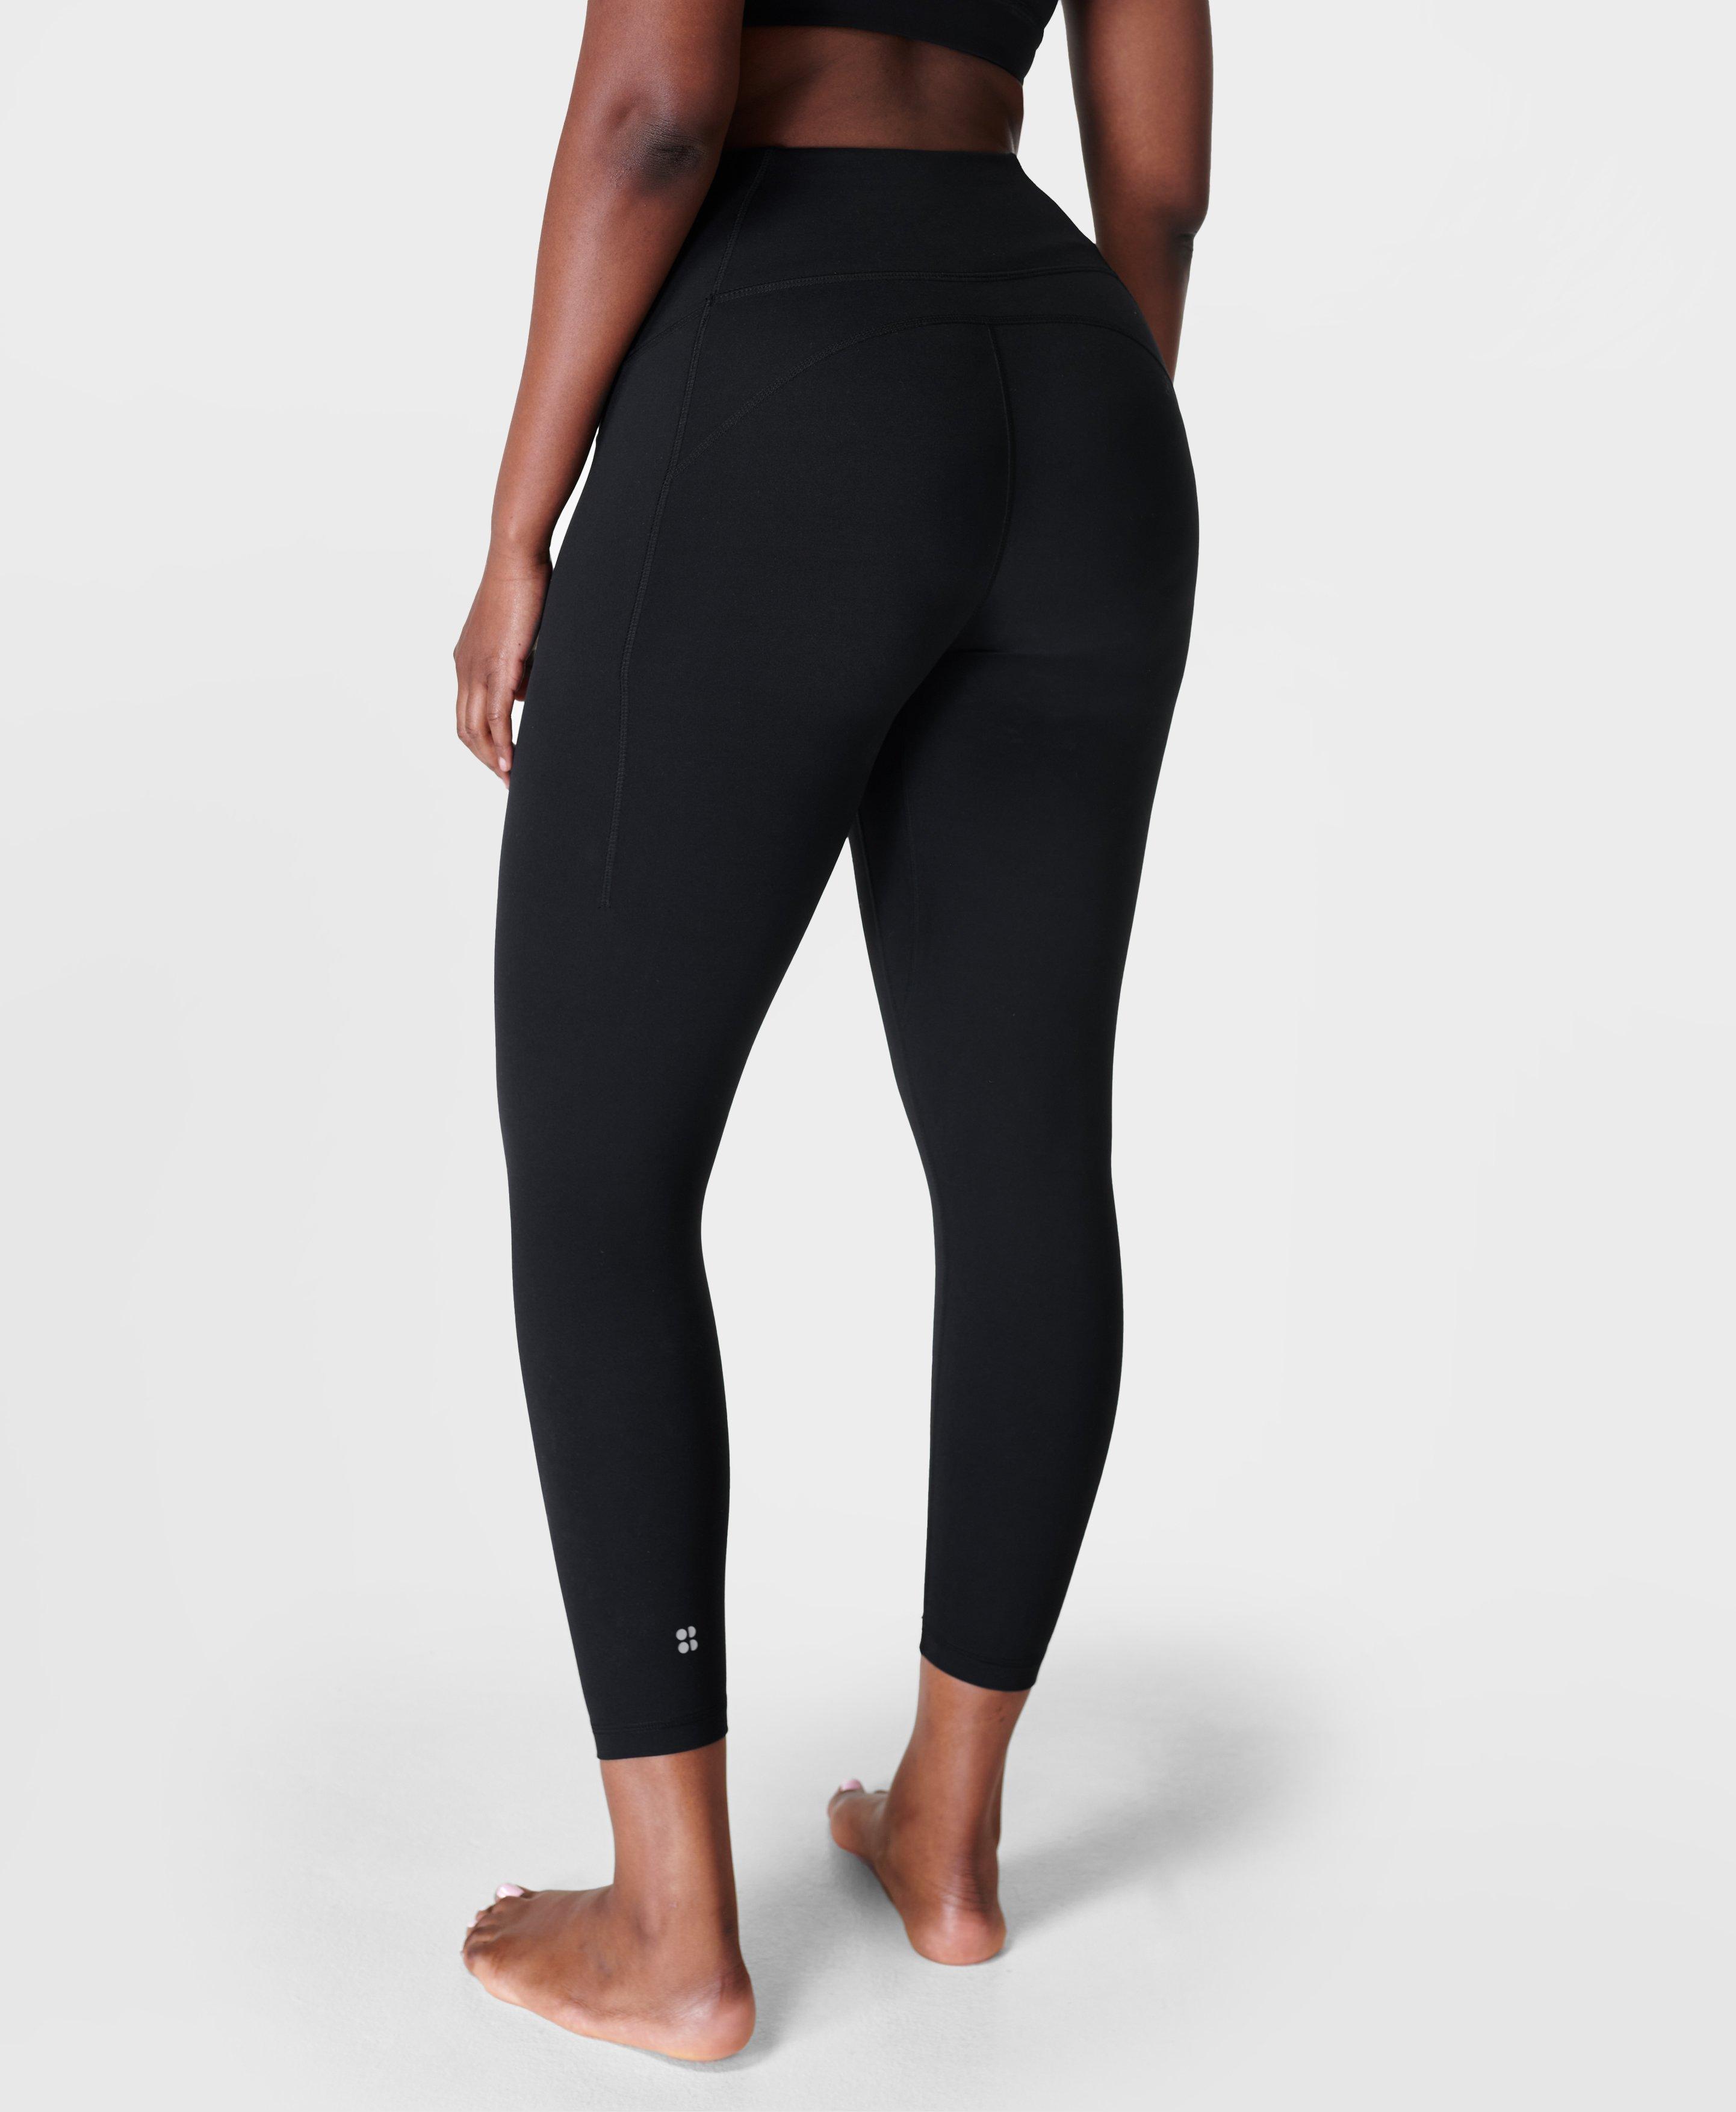 Woman's Lululemon Size 8 Black In Movement Leggings With Bilateral